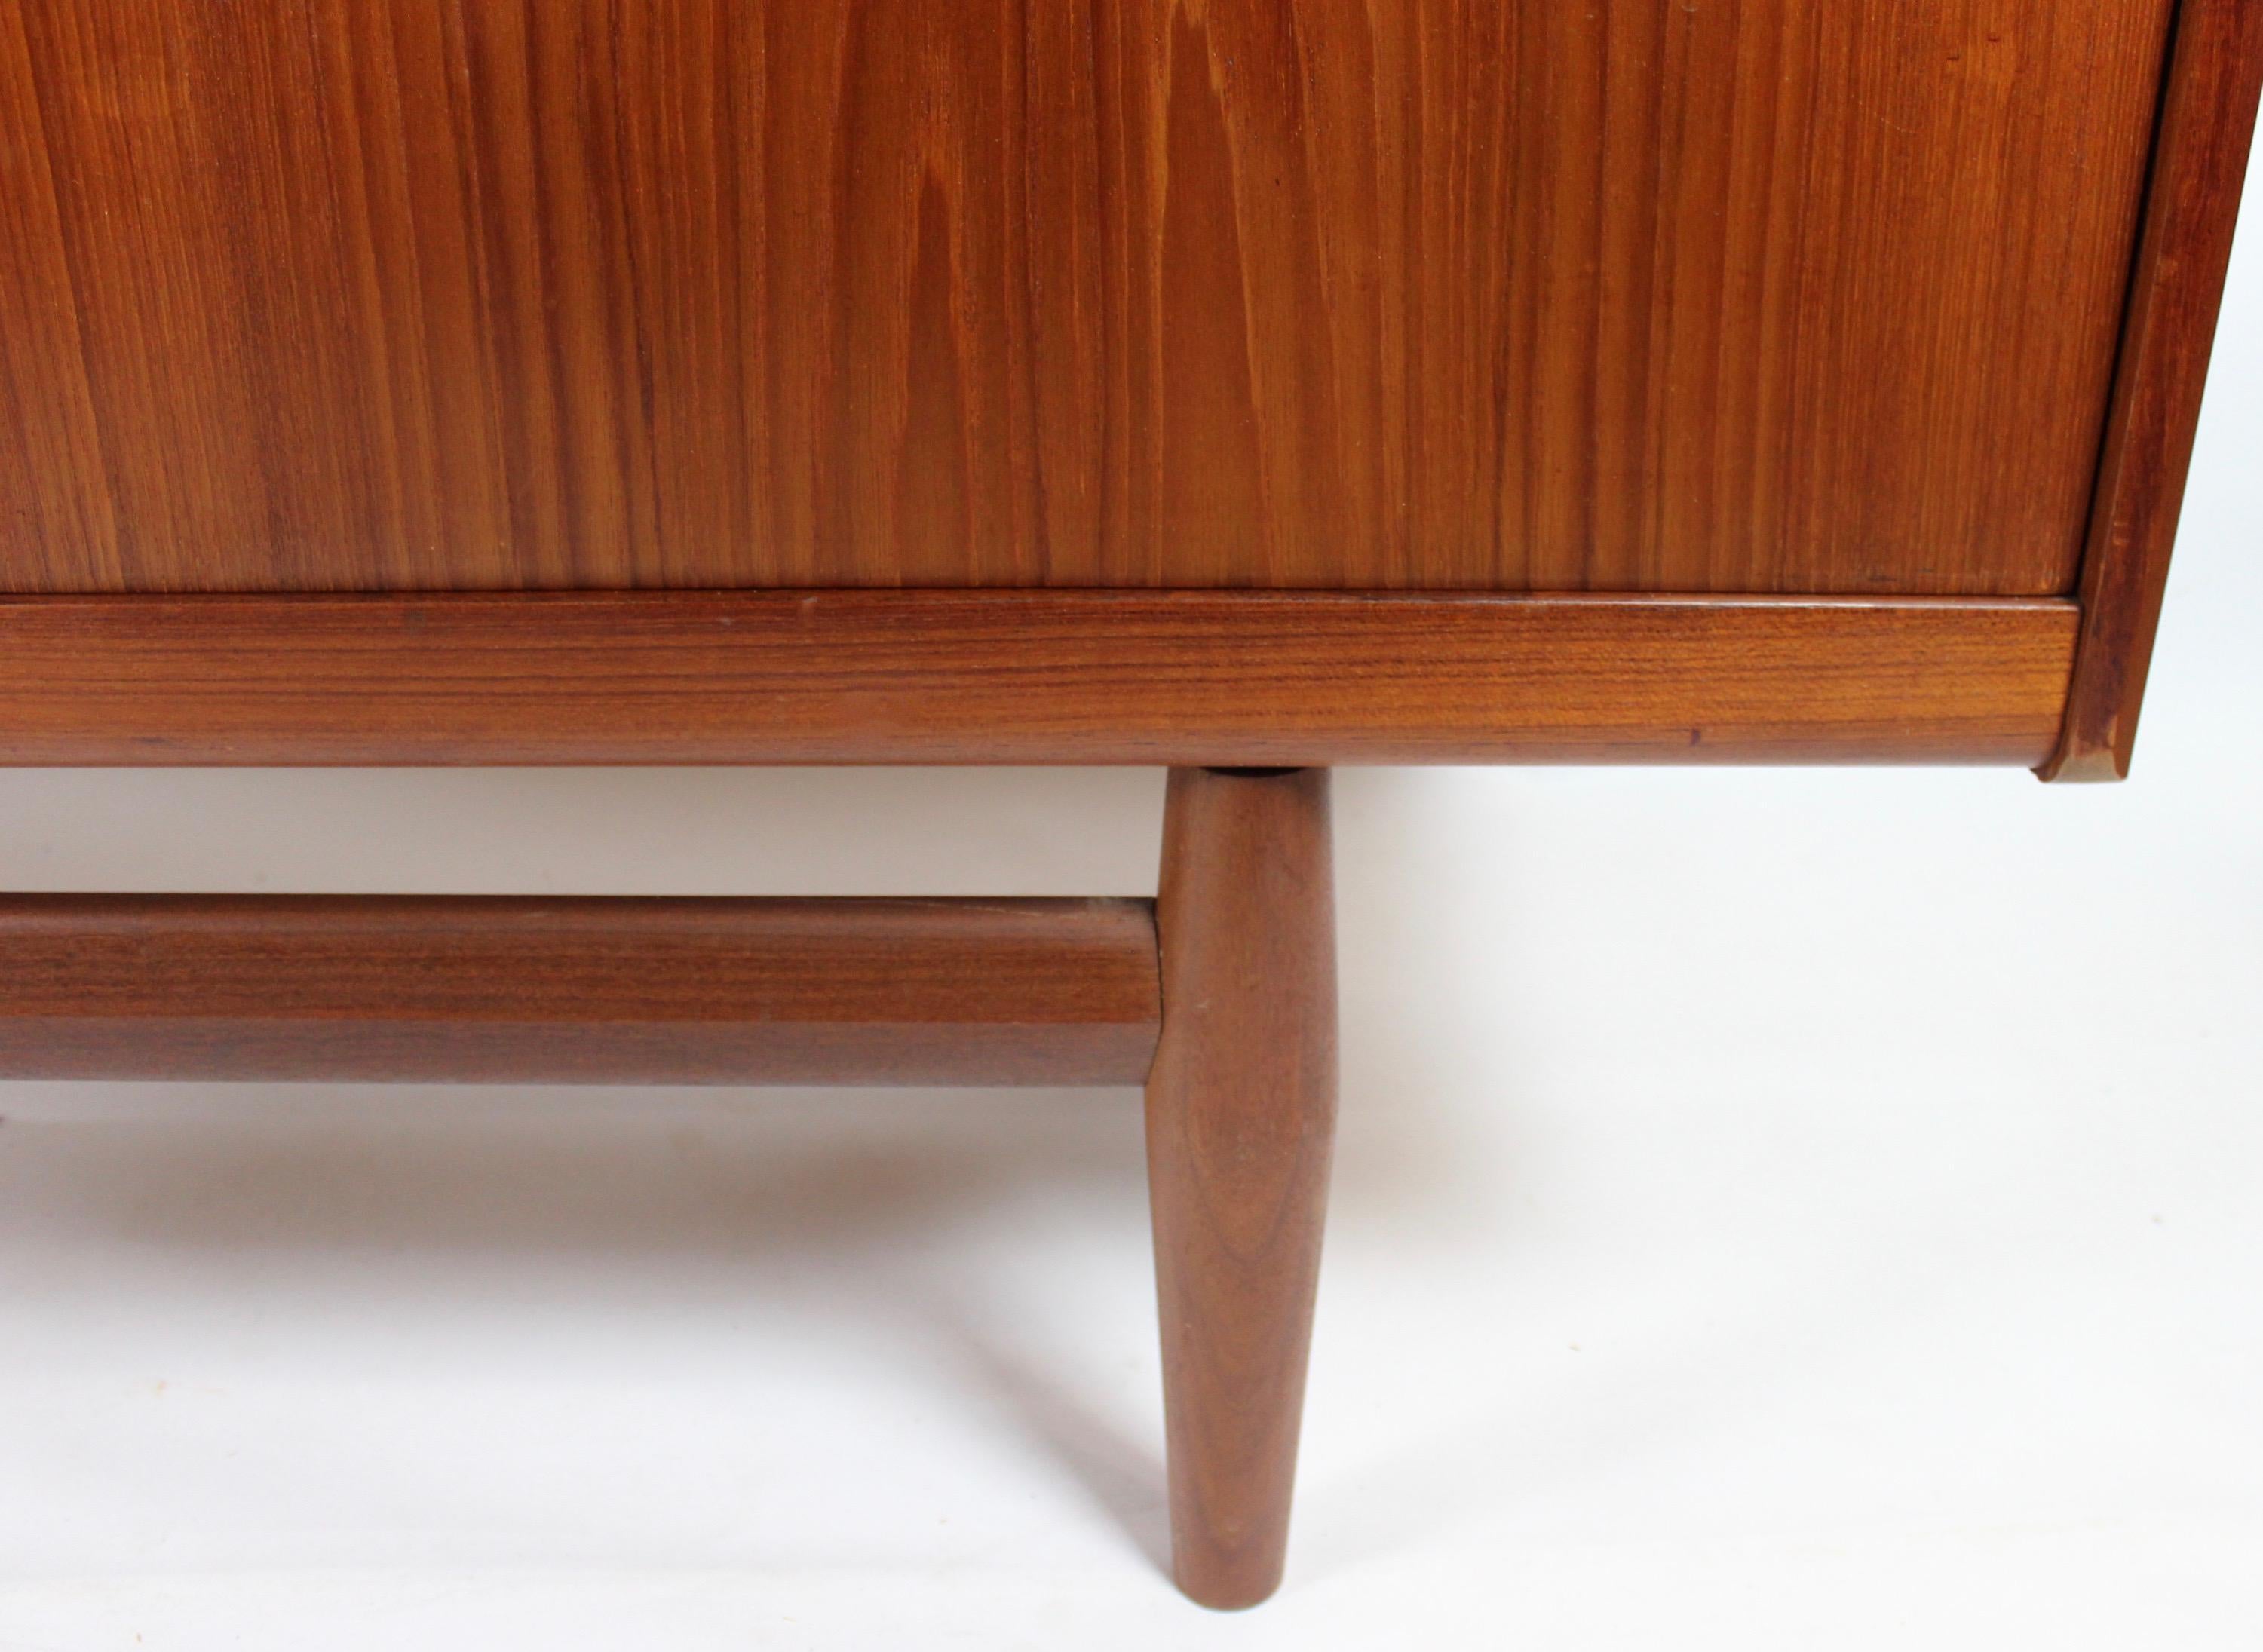 Mid-Century Modern Sideboard in Teak of Danish Design from the 1960s For Sale